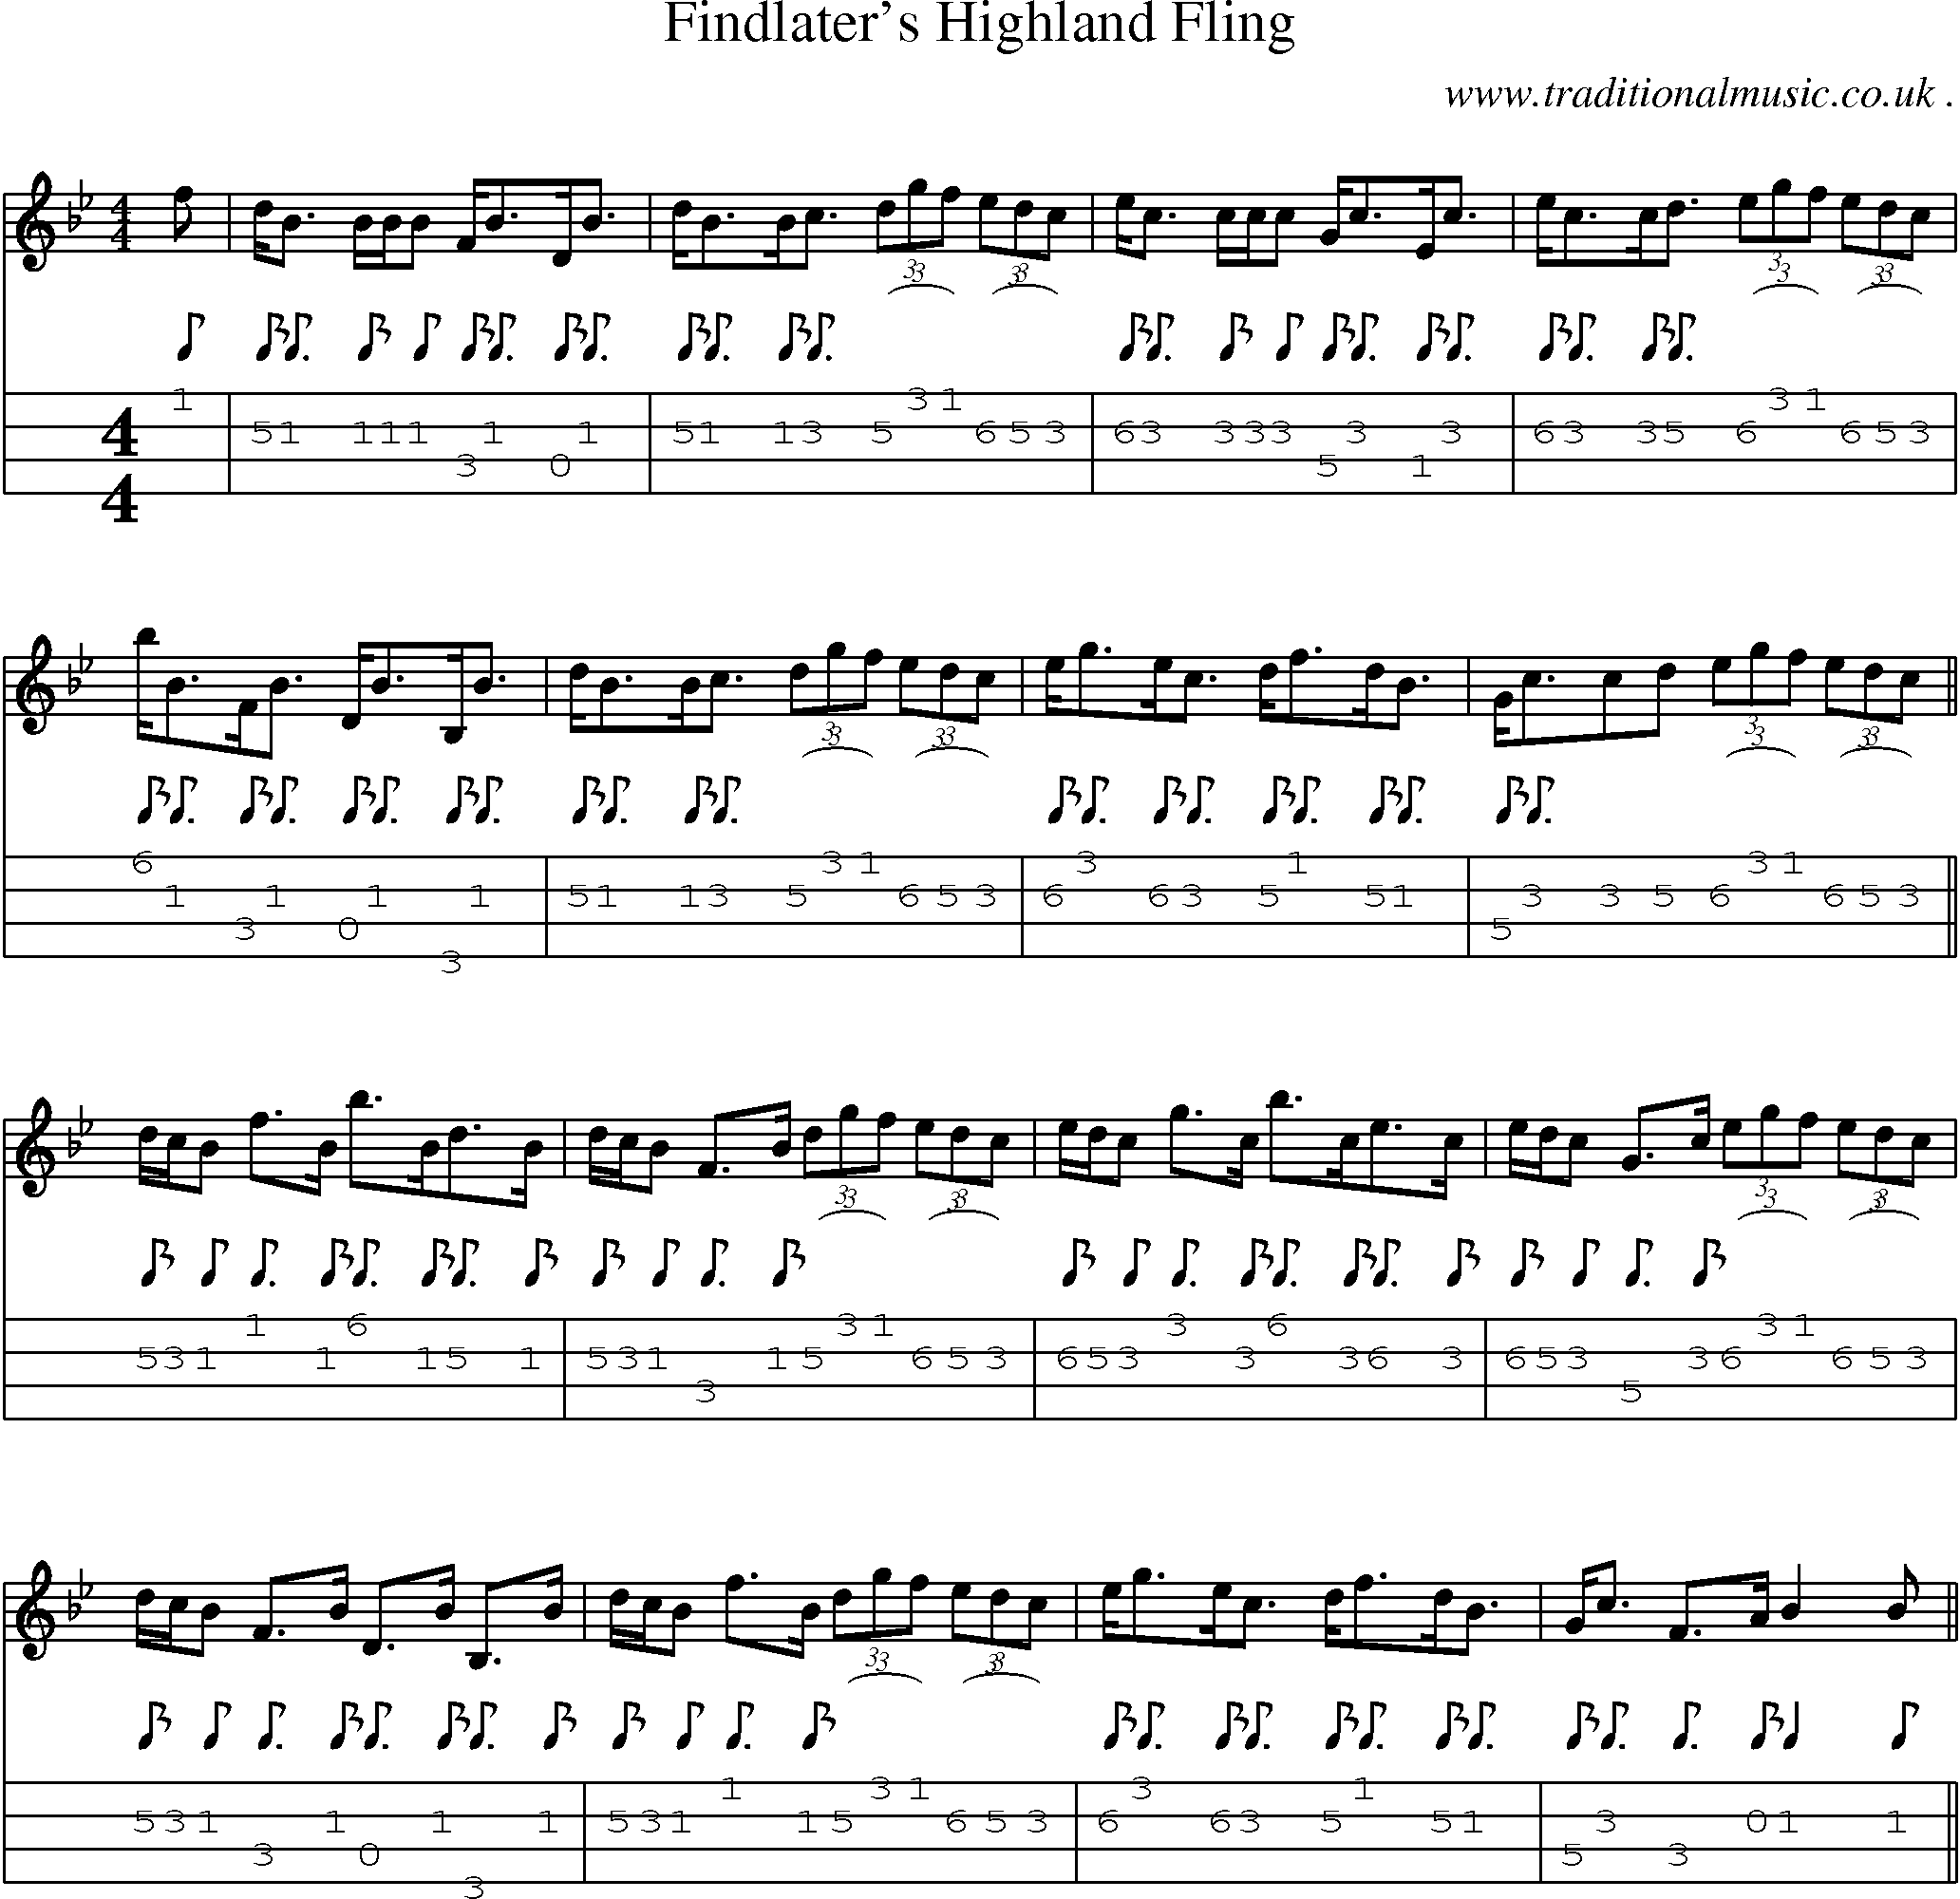 Sheet-Music and Mandolin Tabs for Findlaters Highland Fling